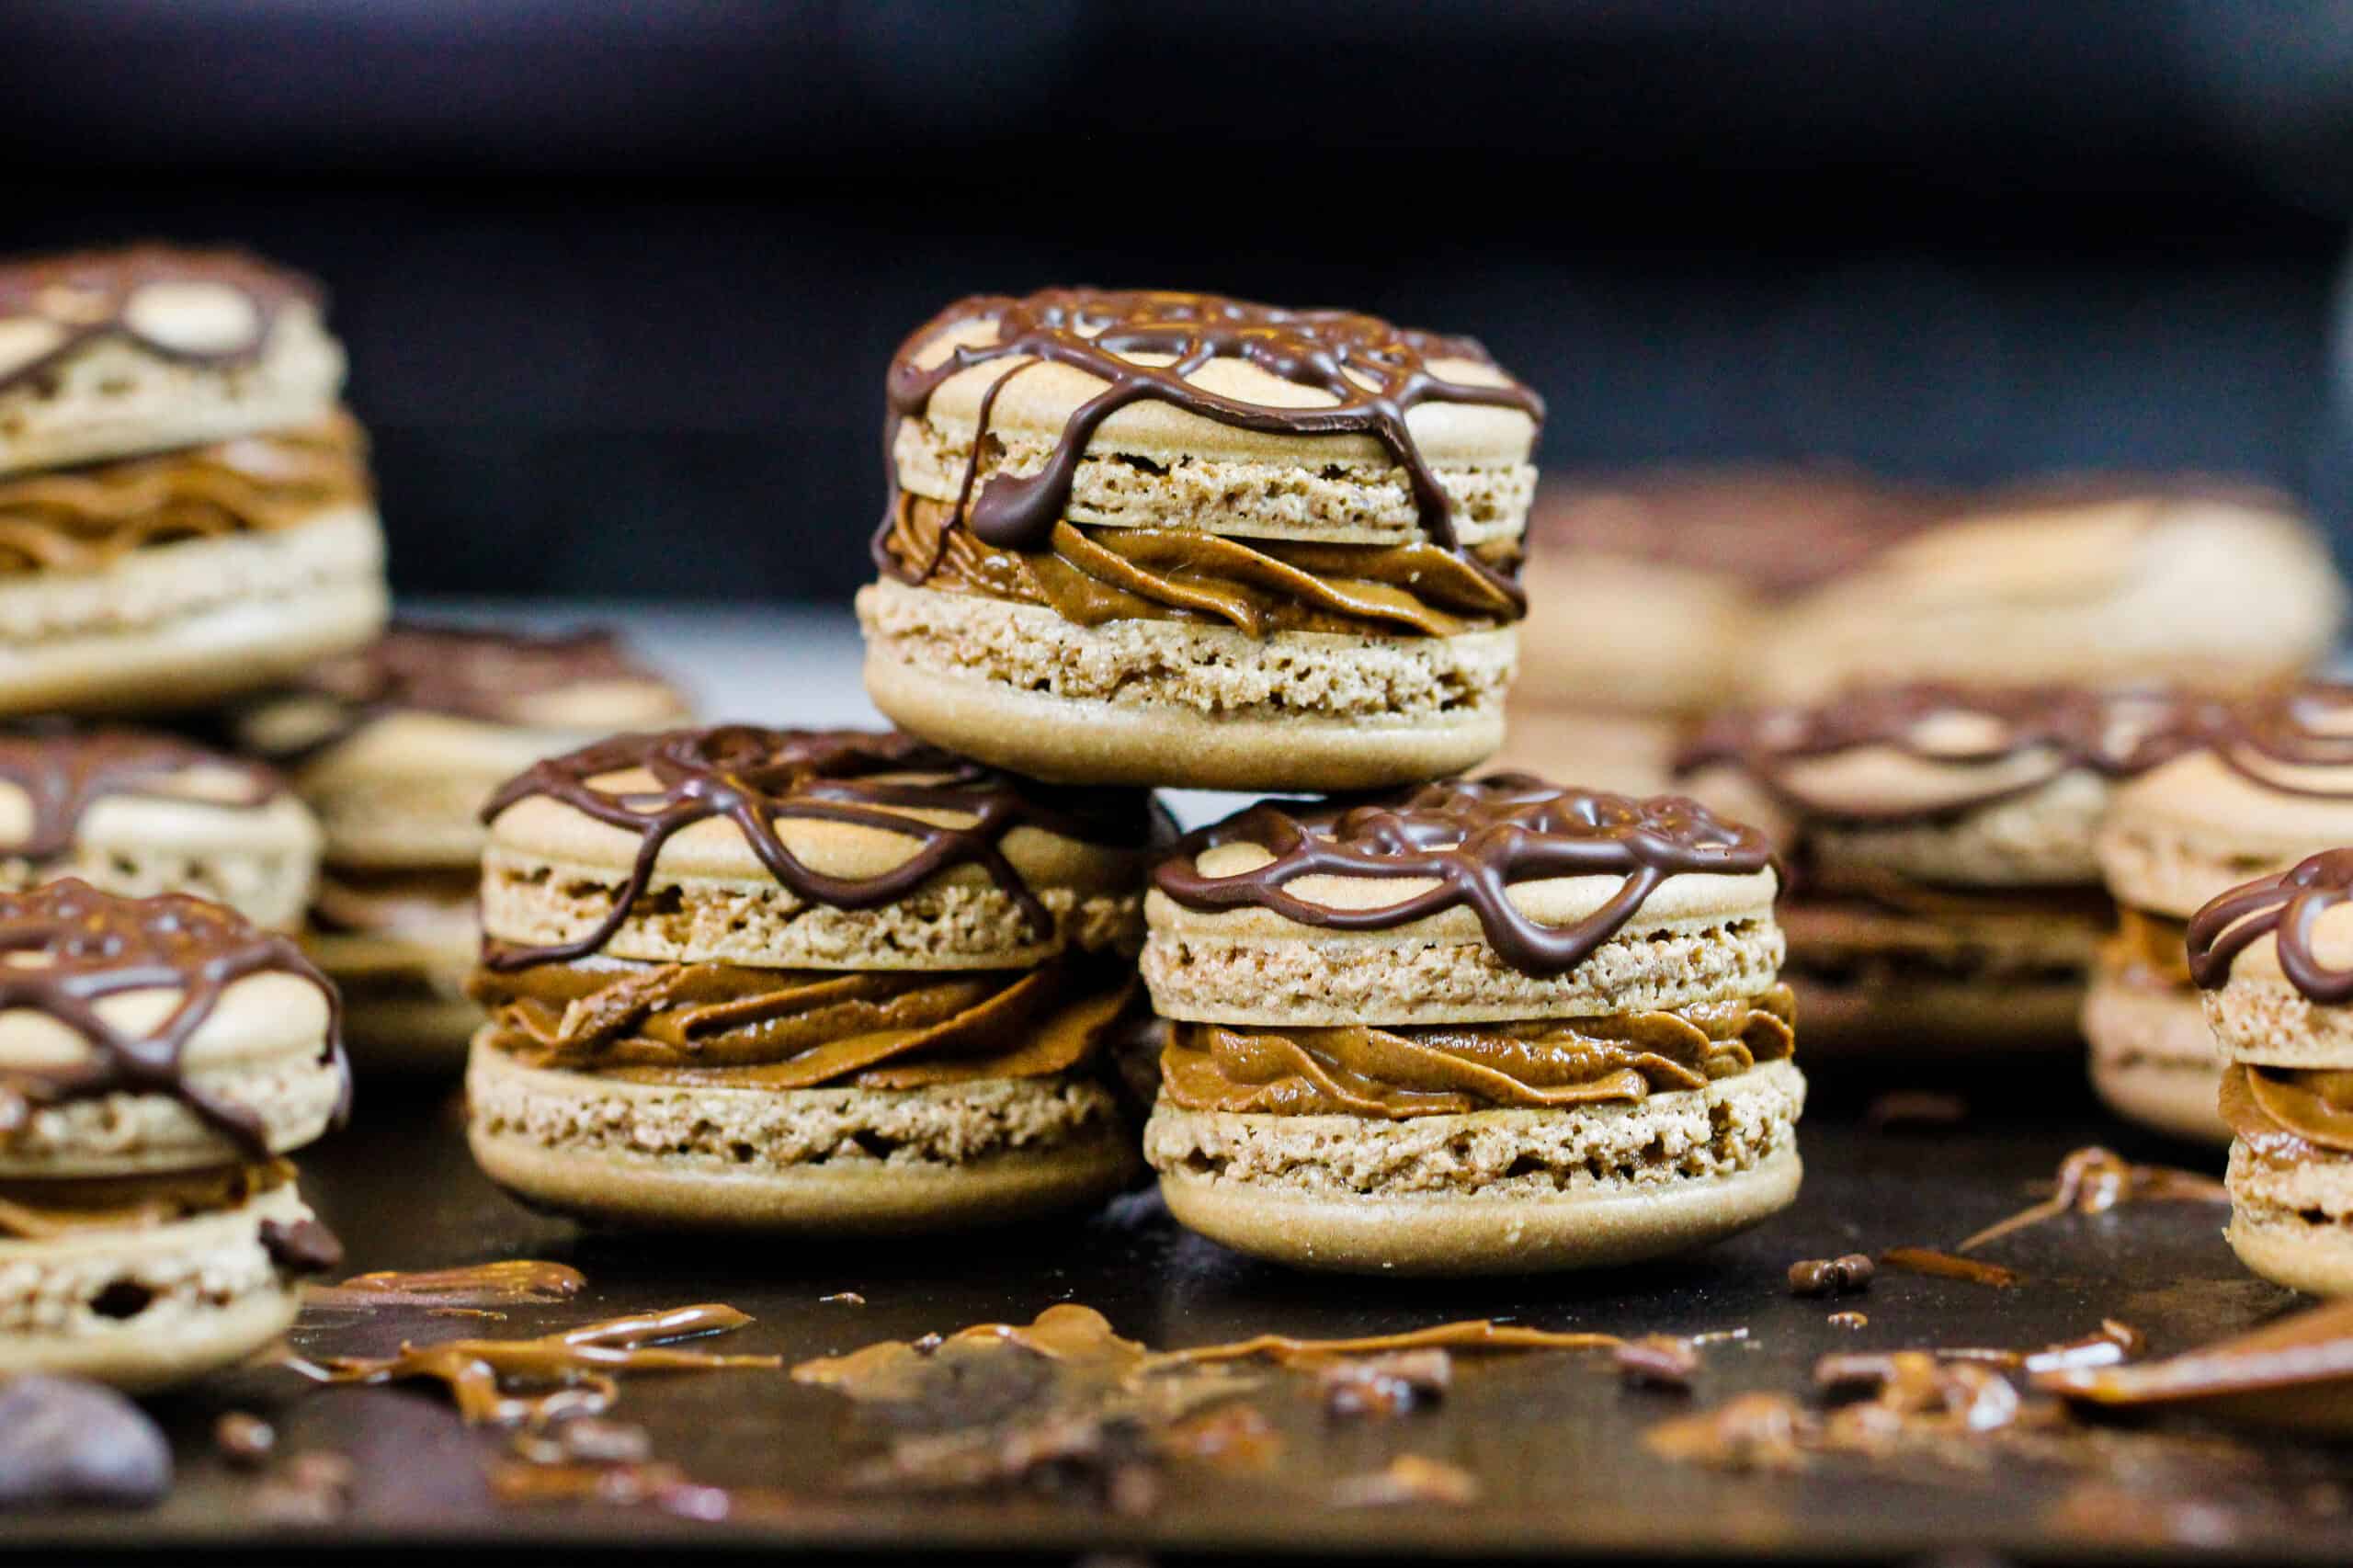 image of Nutella macarons that have been decorated with drizzled chocolate